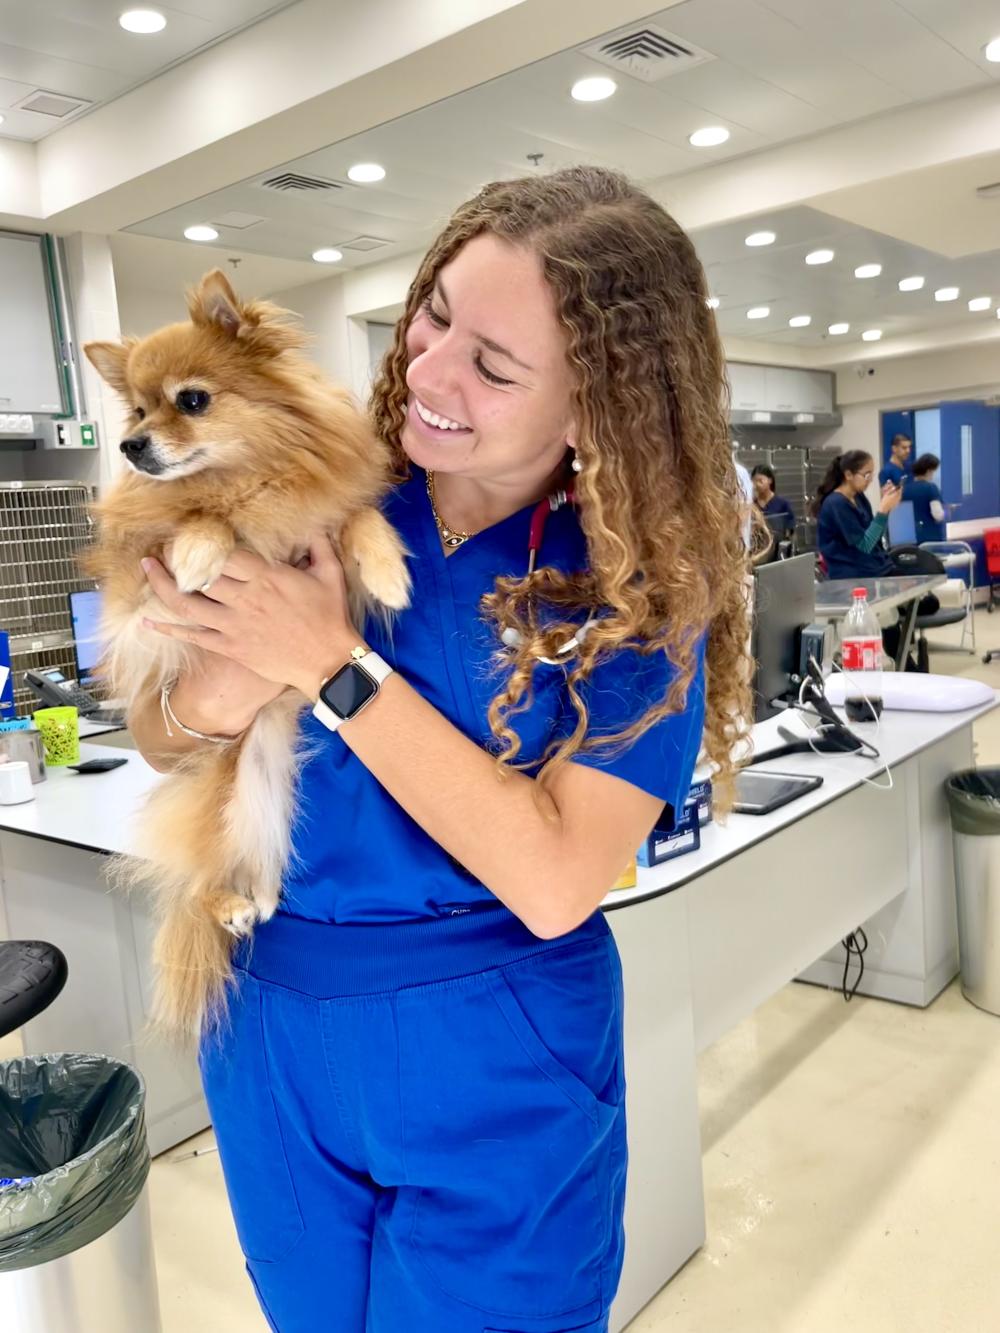 Orli Algrannati, current animal science student, wears her blue scrubs while holding a fluffy light brown dog.